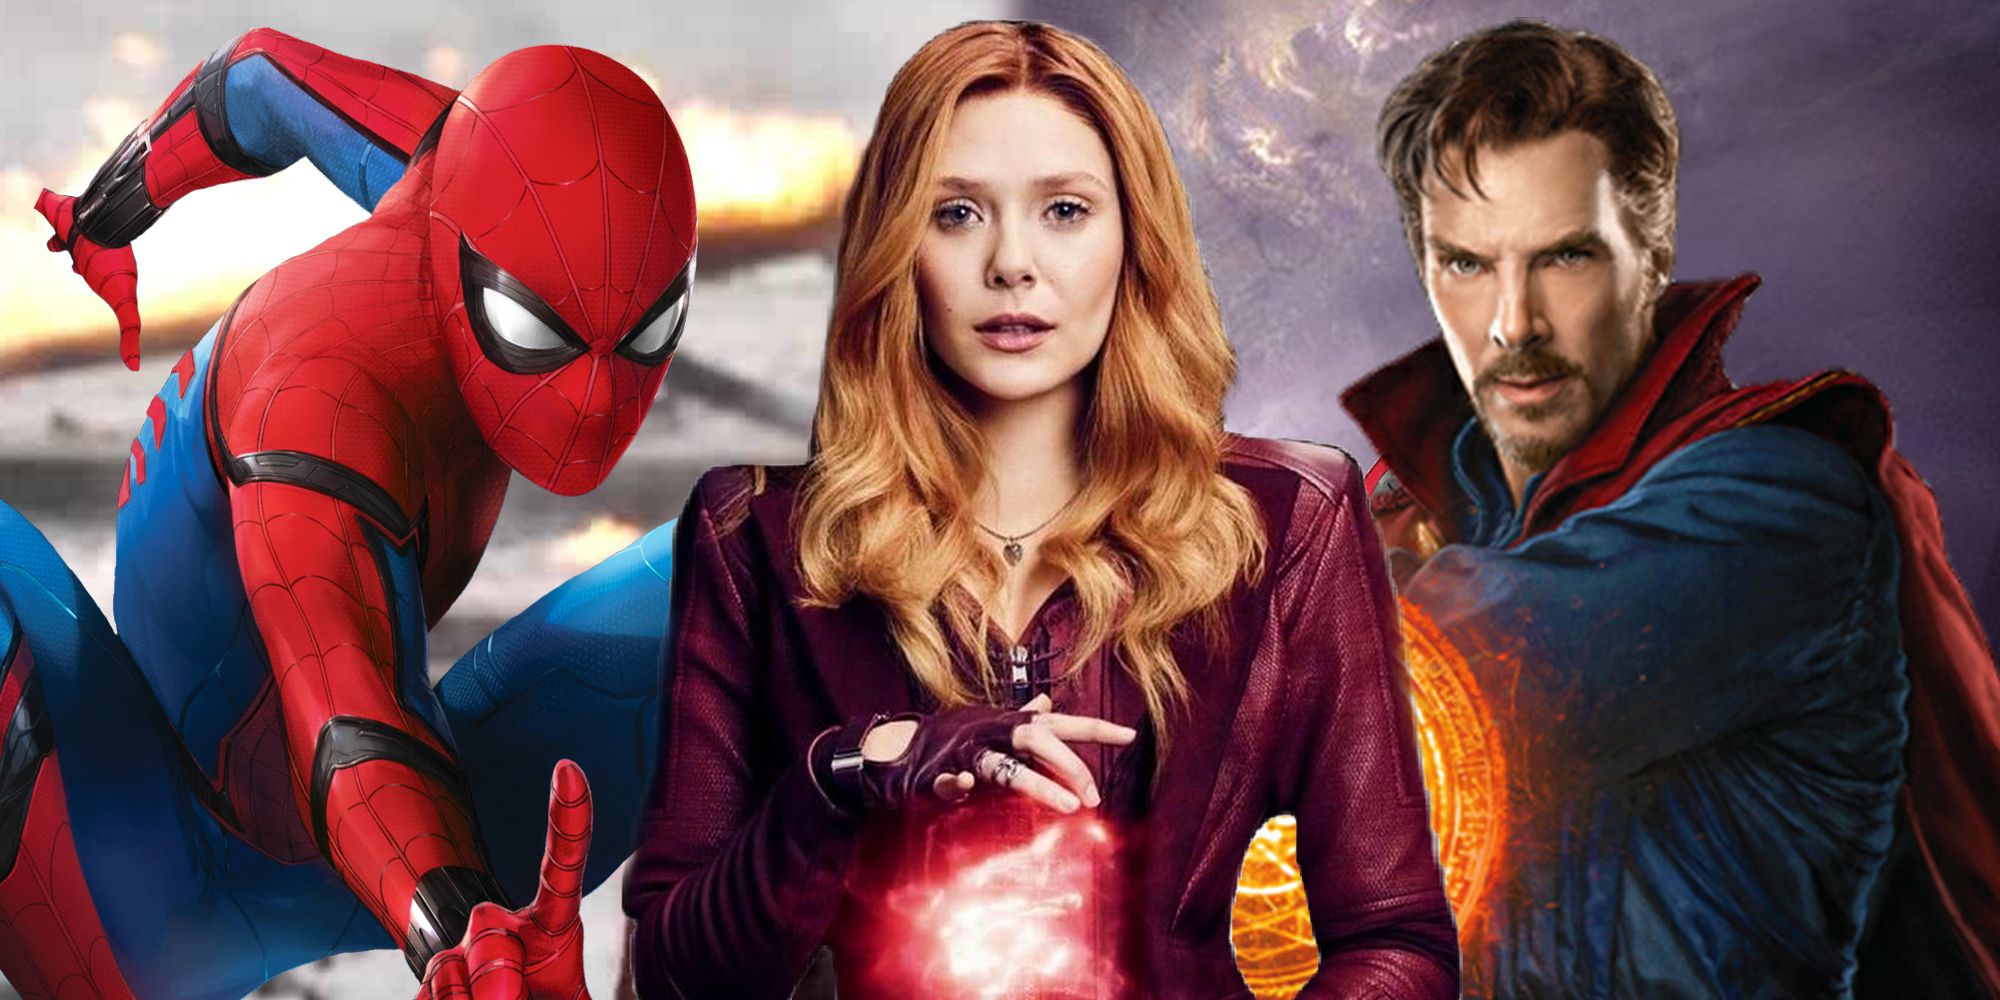 Scarlet Witch, Spider-Man, and Doctor Strange in the MCU